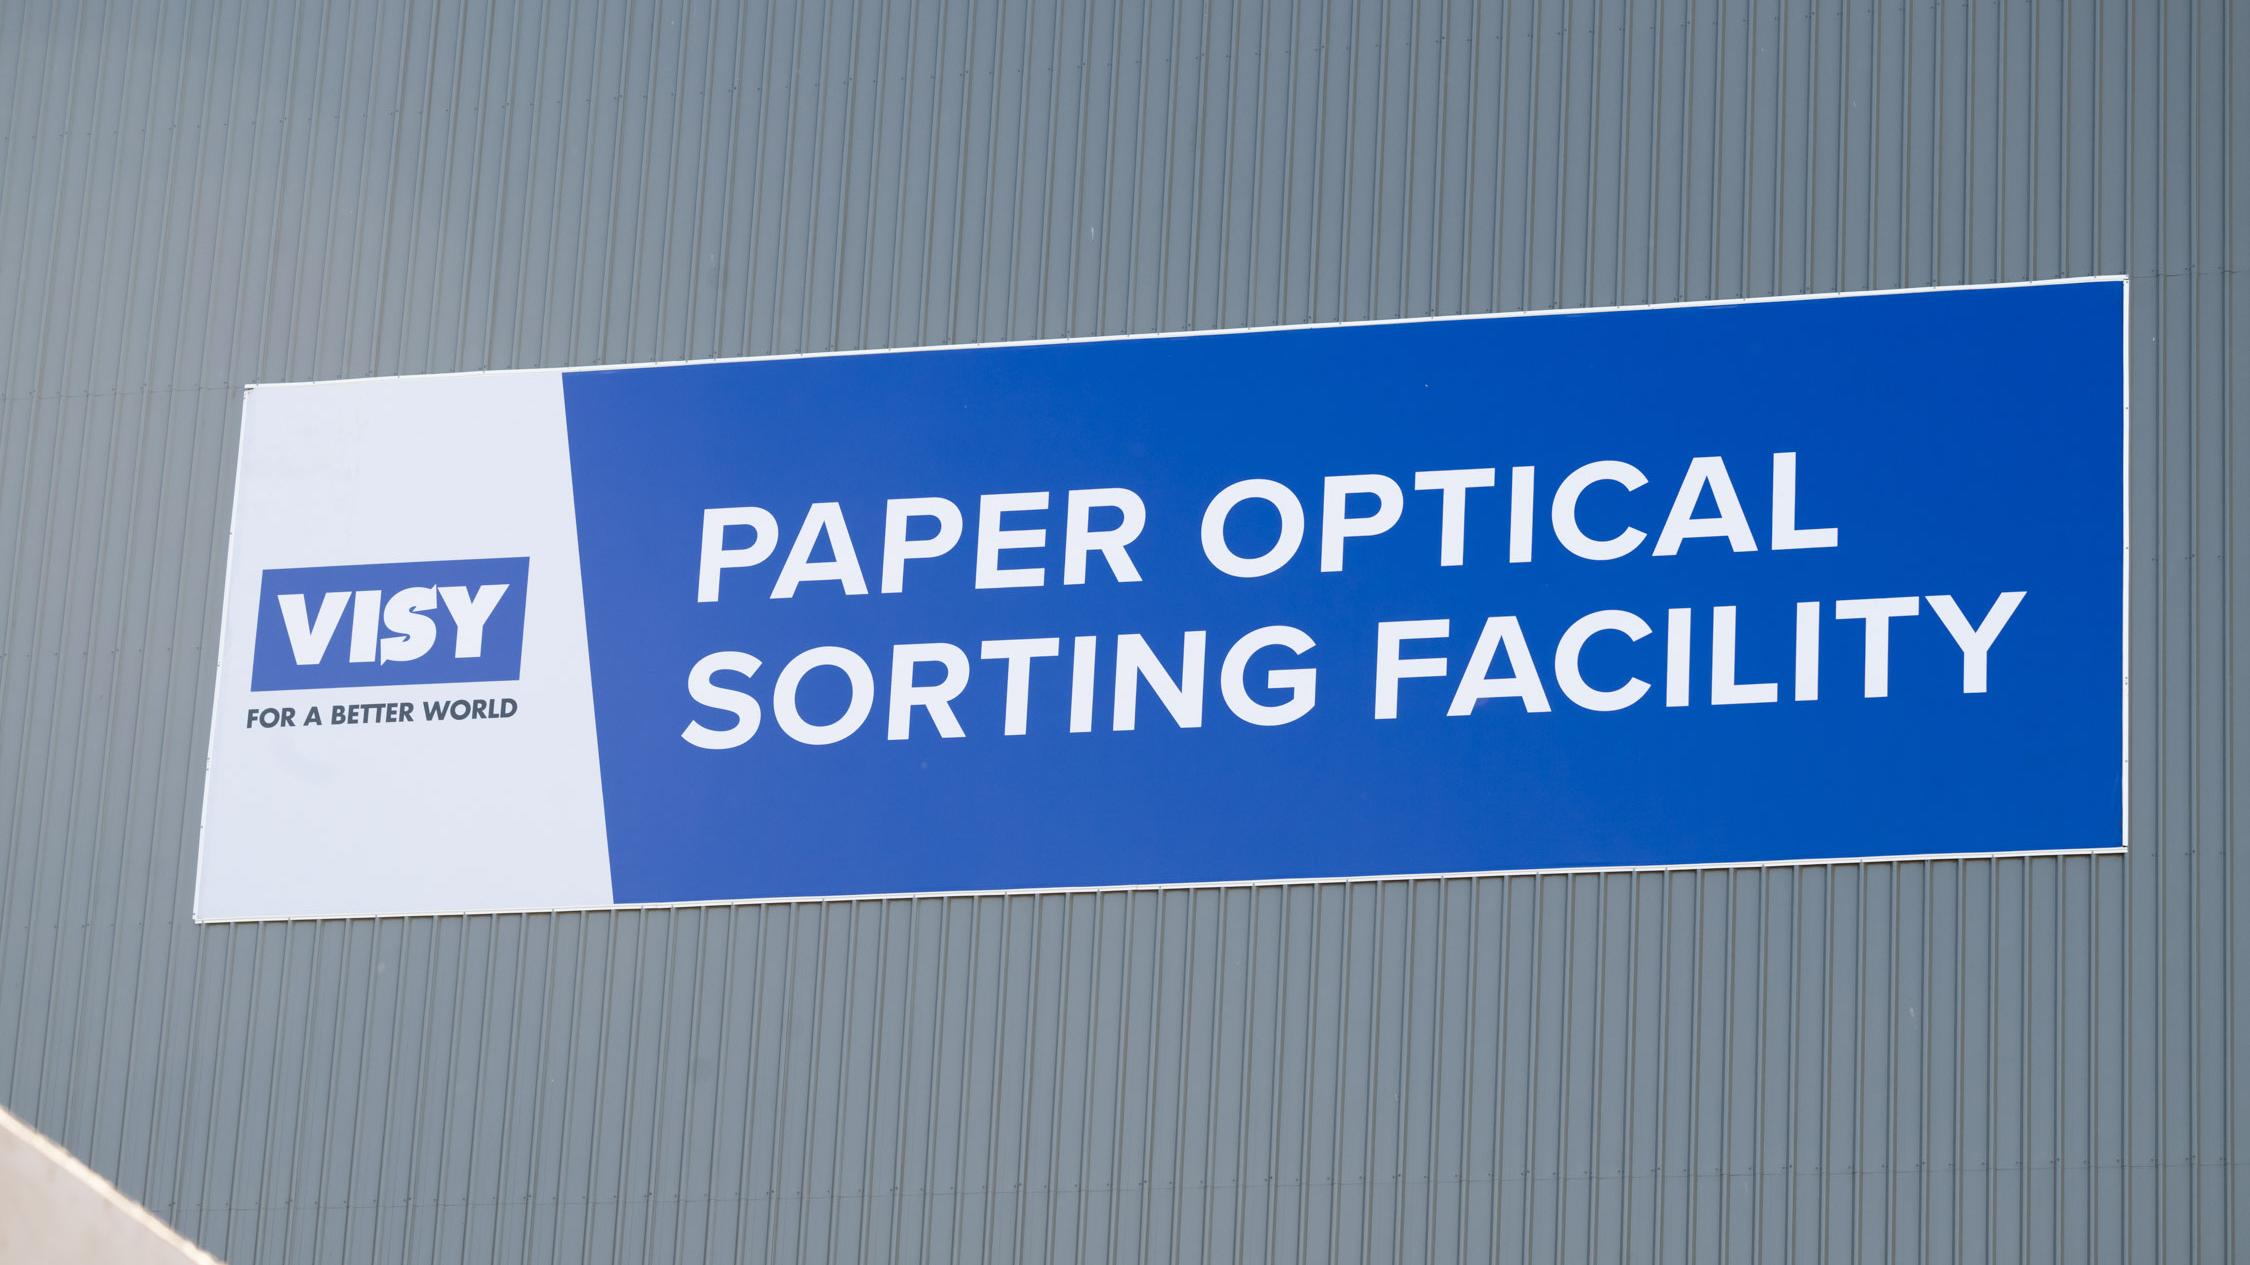 Paper optical sorting facility sign outside of site